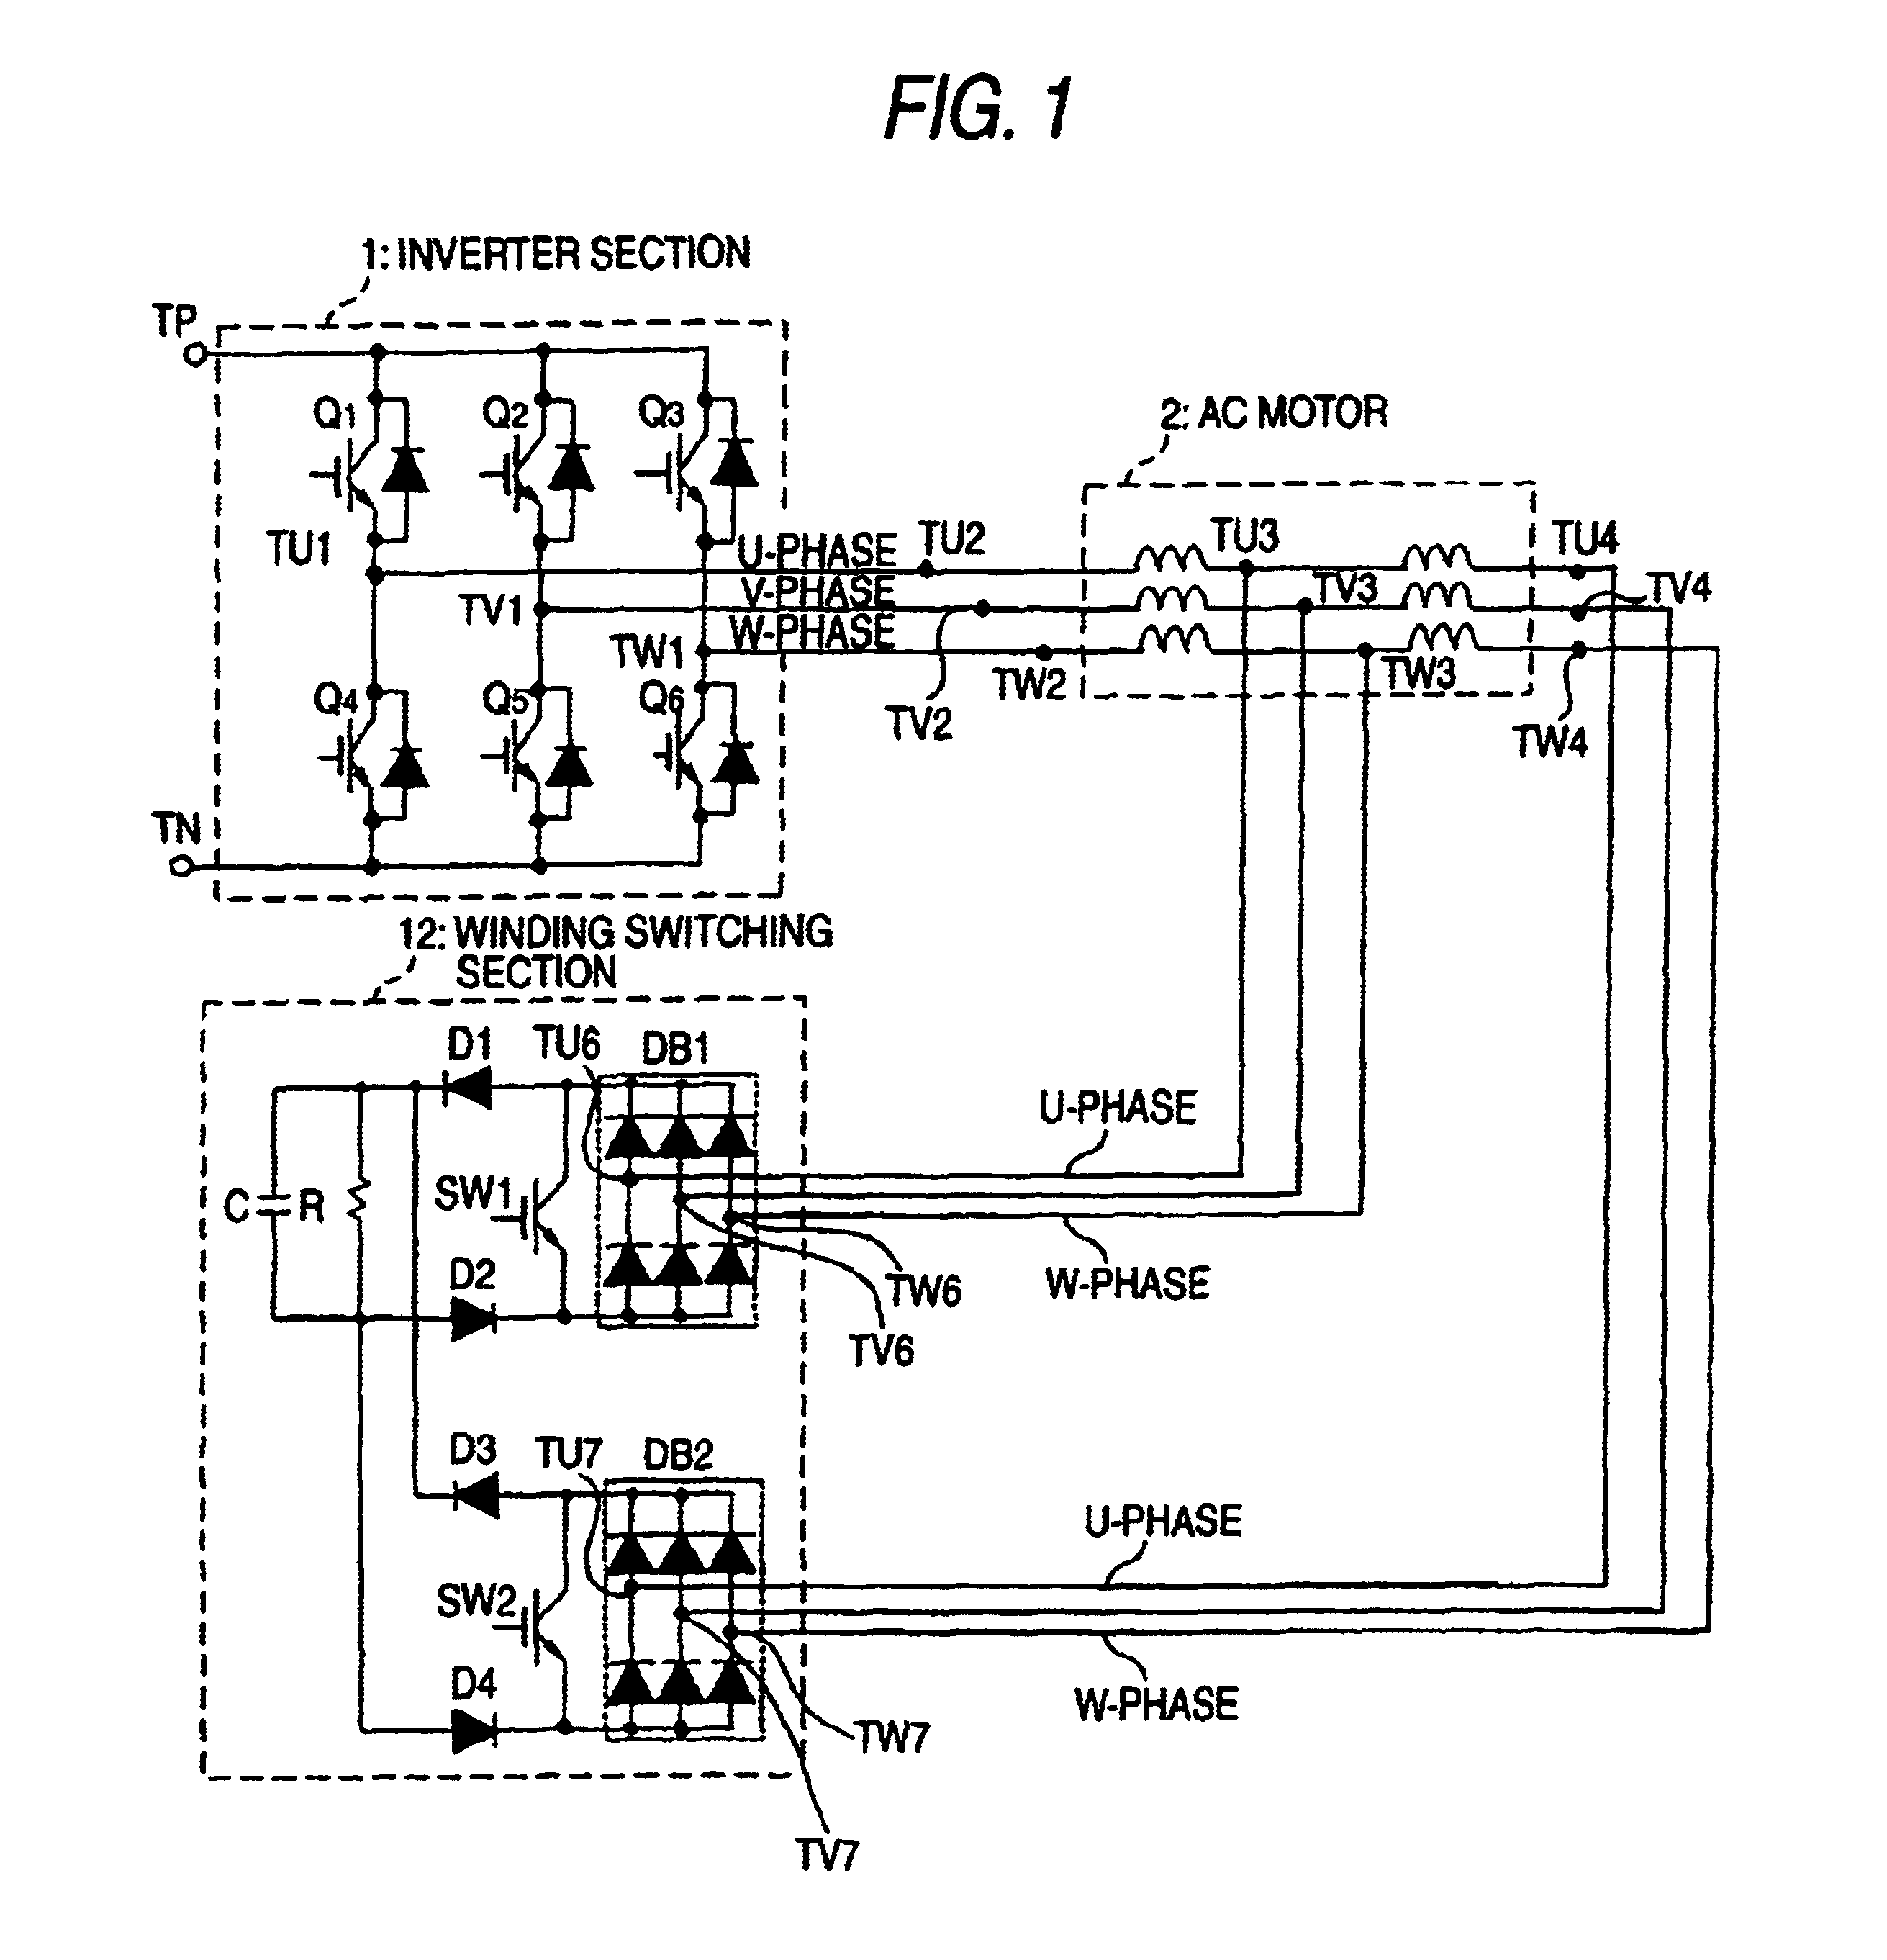 Apparatus for switching windings of AC three-phase motor